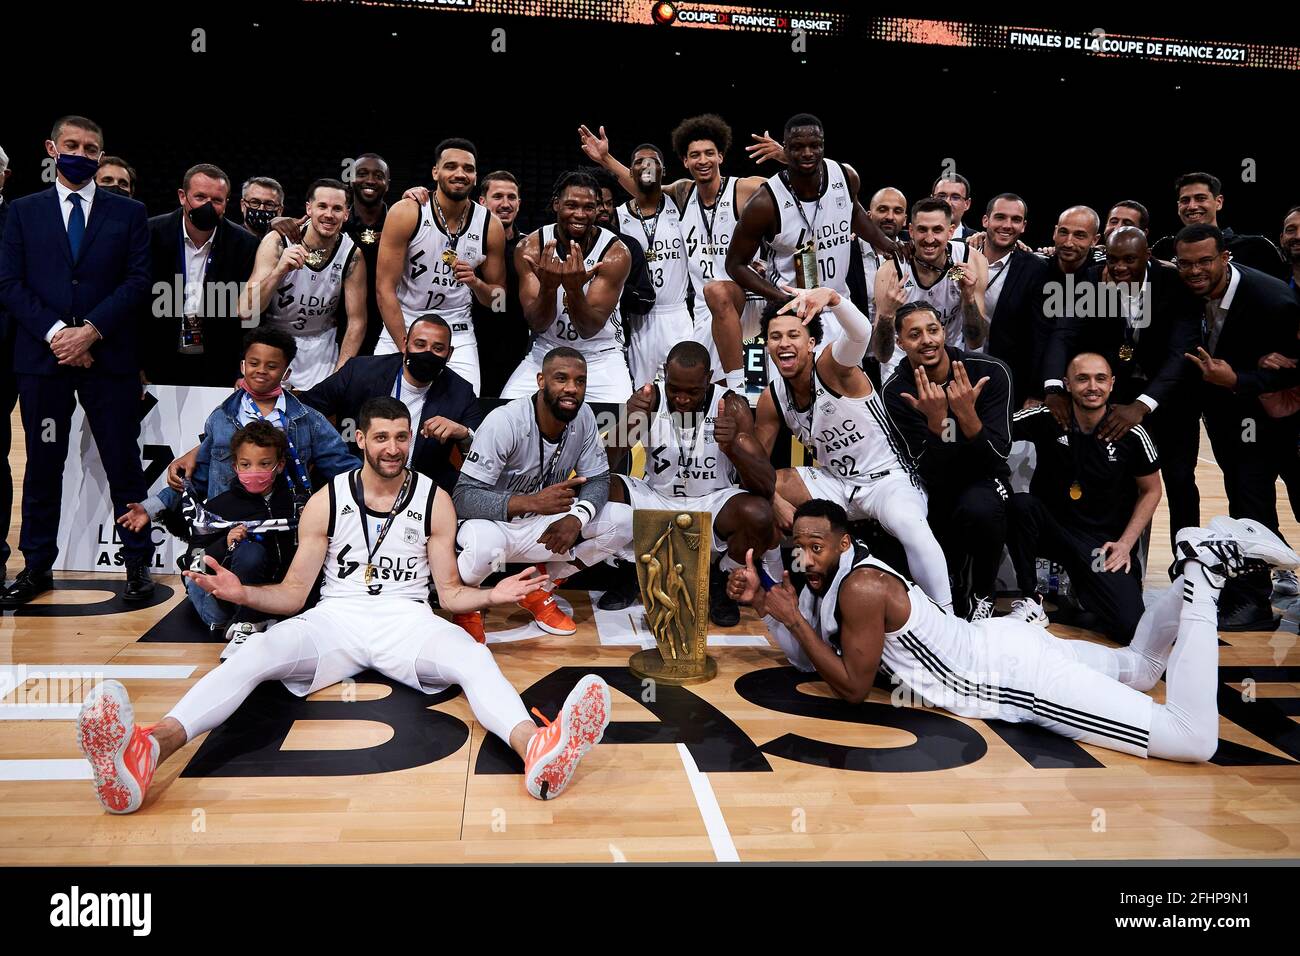 Winner Team of ASVEL, Lyon-Villeurbanne during the French Cup, Final basketball  match between JDA Dijon and LDLC ASVEL on April 24, 2021 at AccorHotels  Arena in Paris, France - Photo Ann-Dee Lamour /